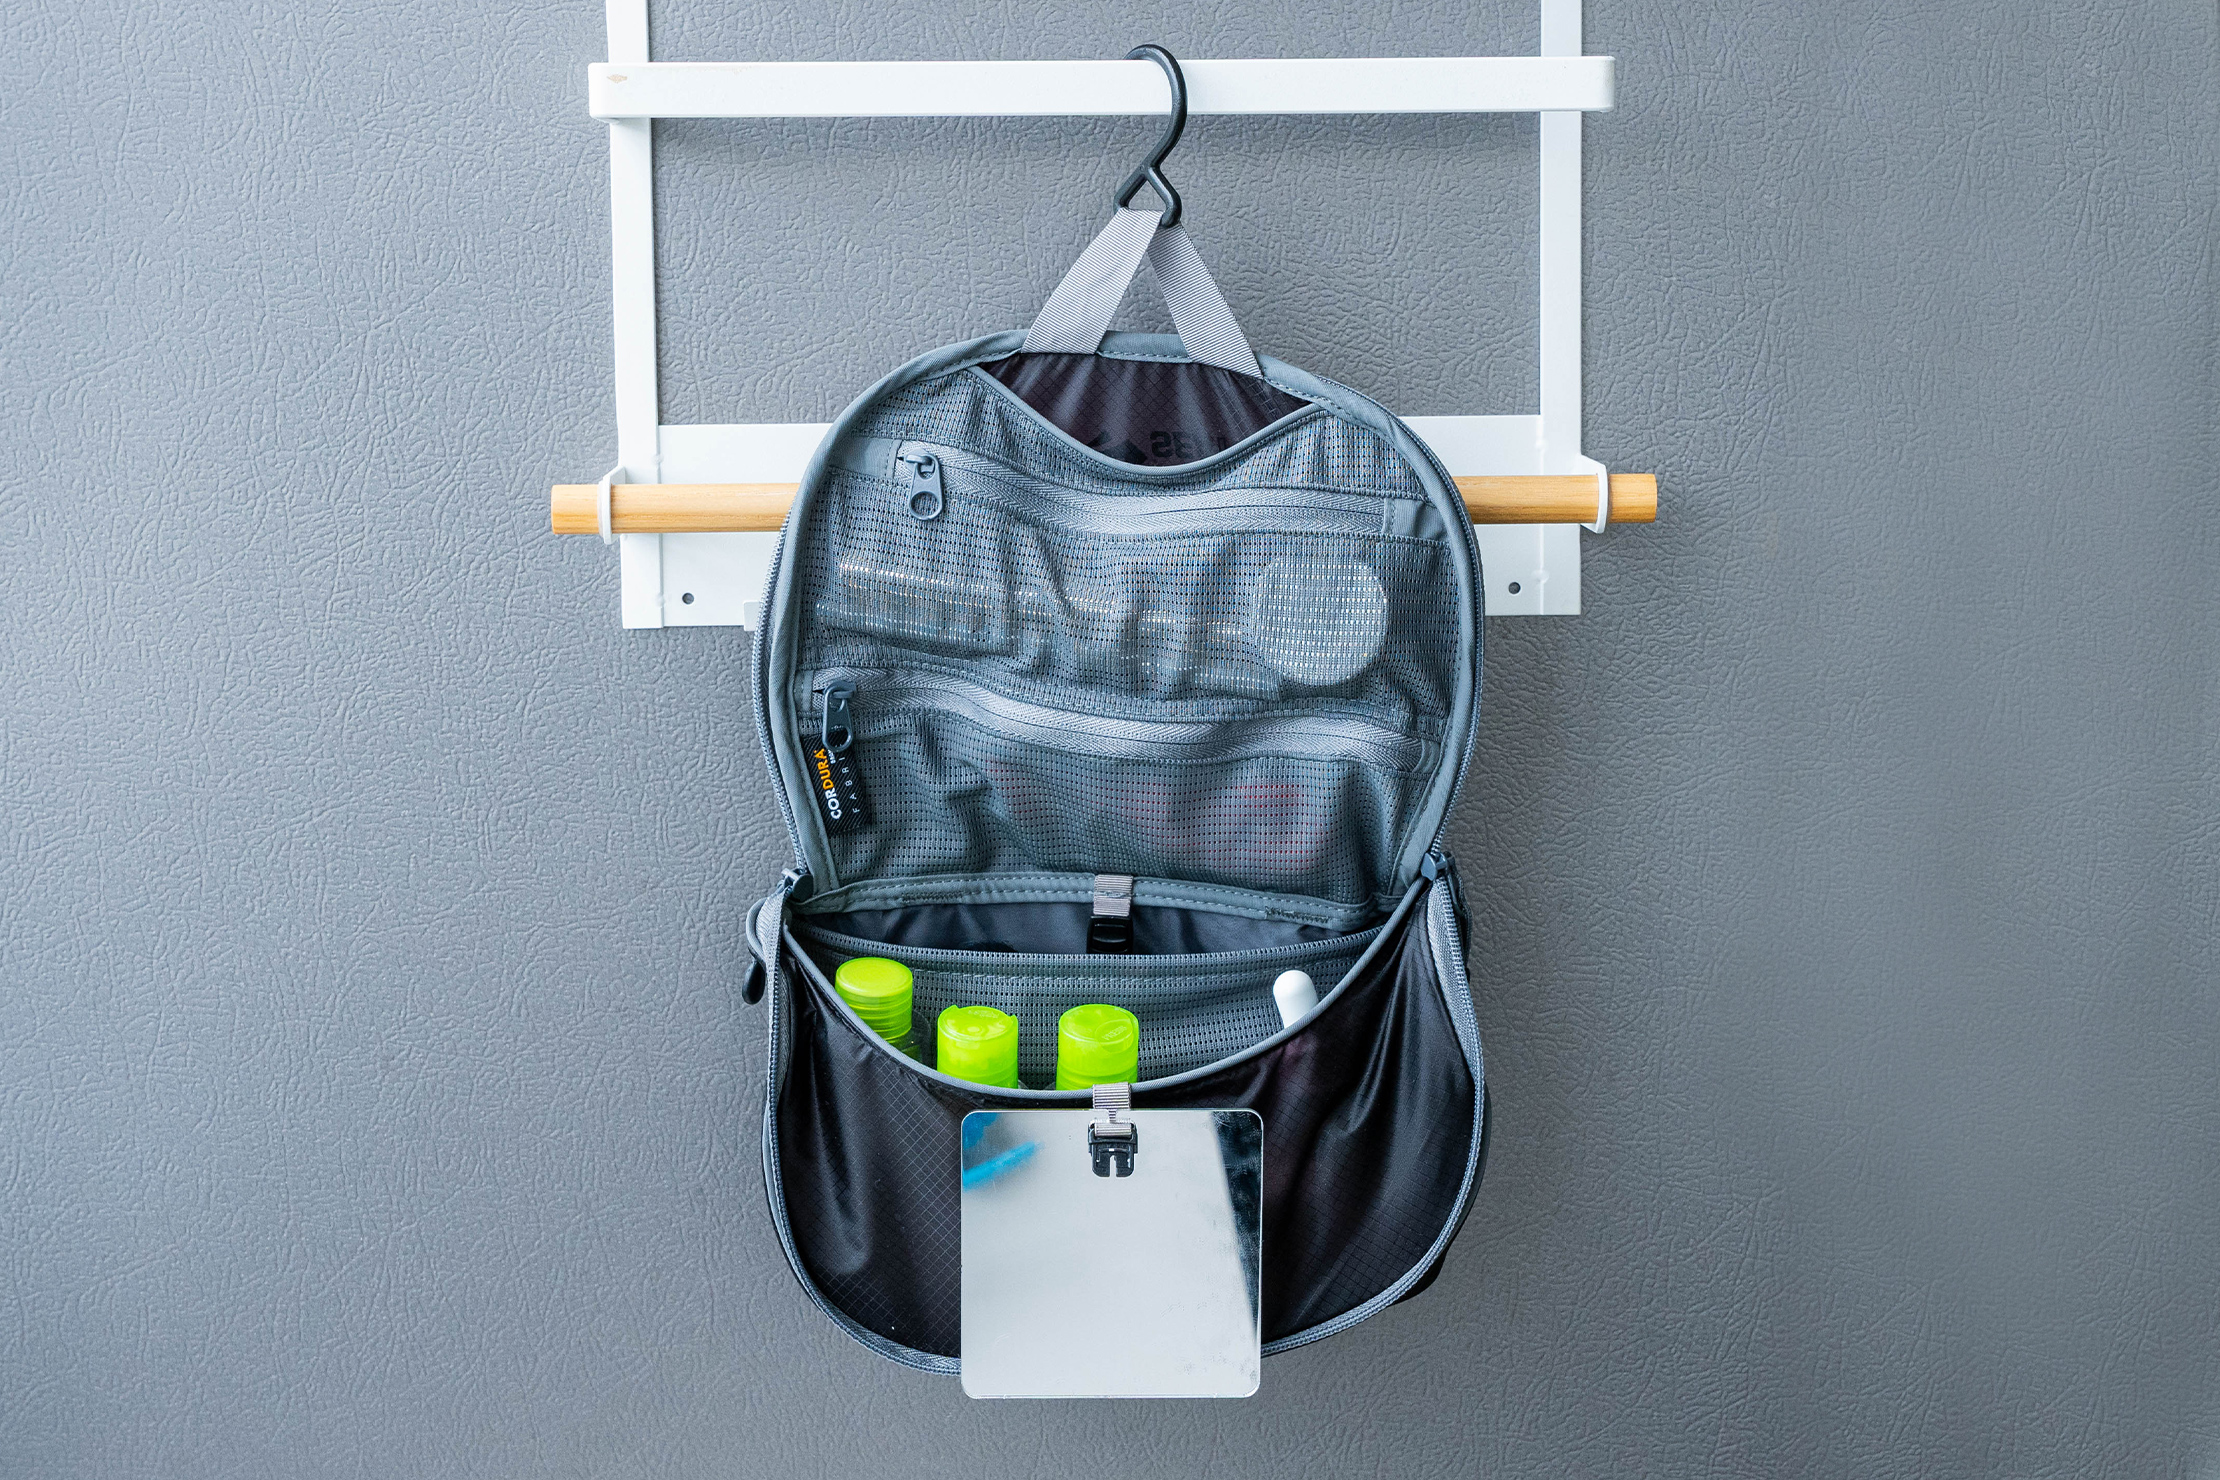 Details 79+ hanging toiletry bags - in.cdgdbentre